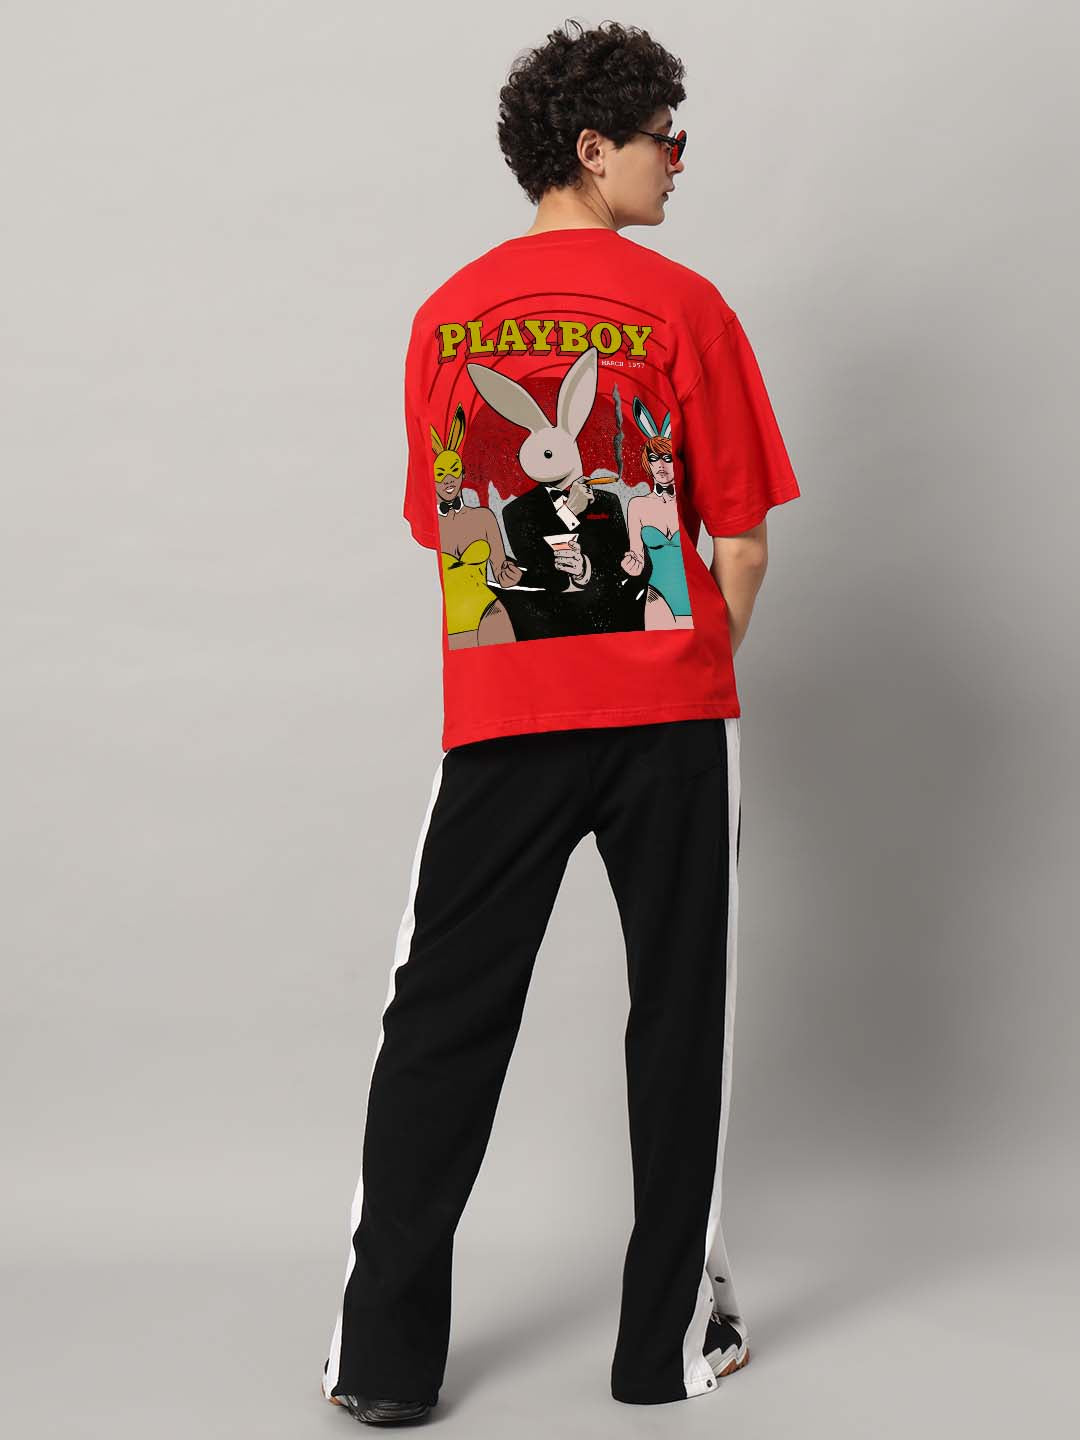 Playboy Over-Sized T-Shirt (Red)